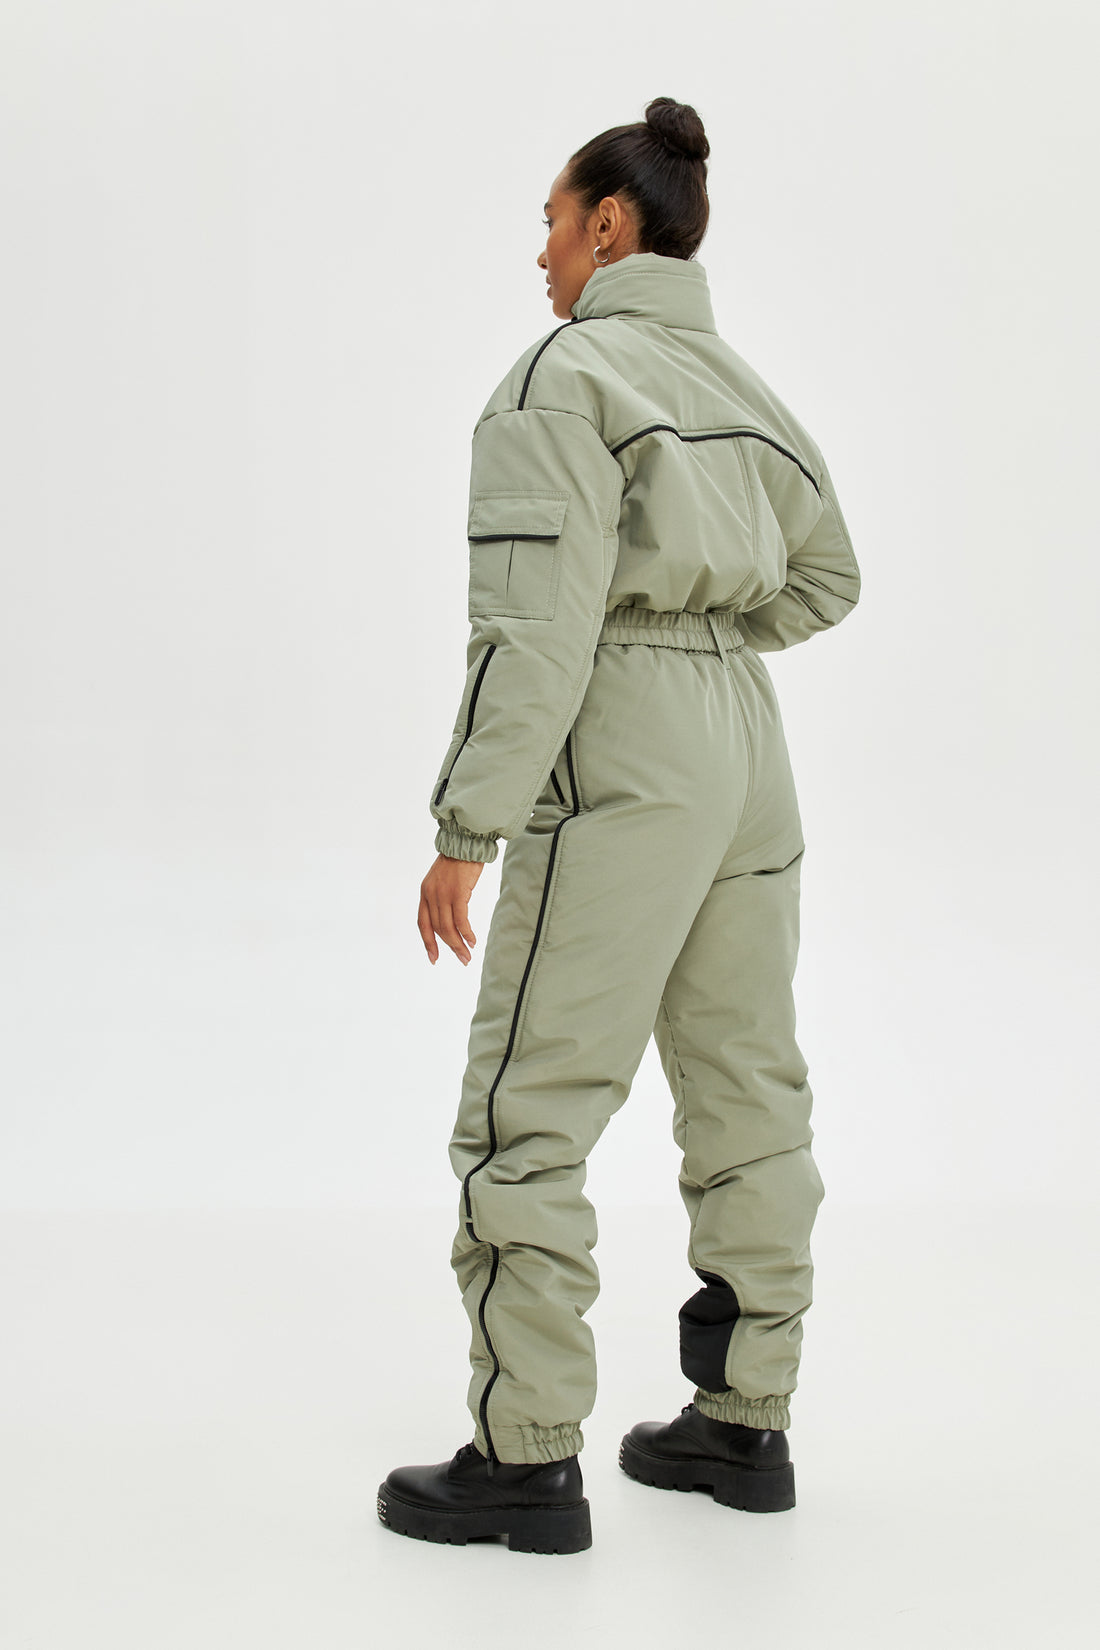 Olive ski suit BLANC - OLIVE with black edging - Full body snowsuit woman for winter sport activewear